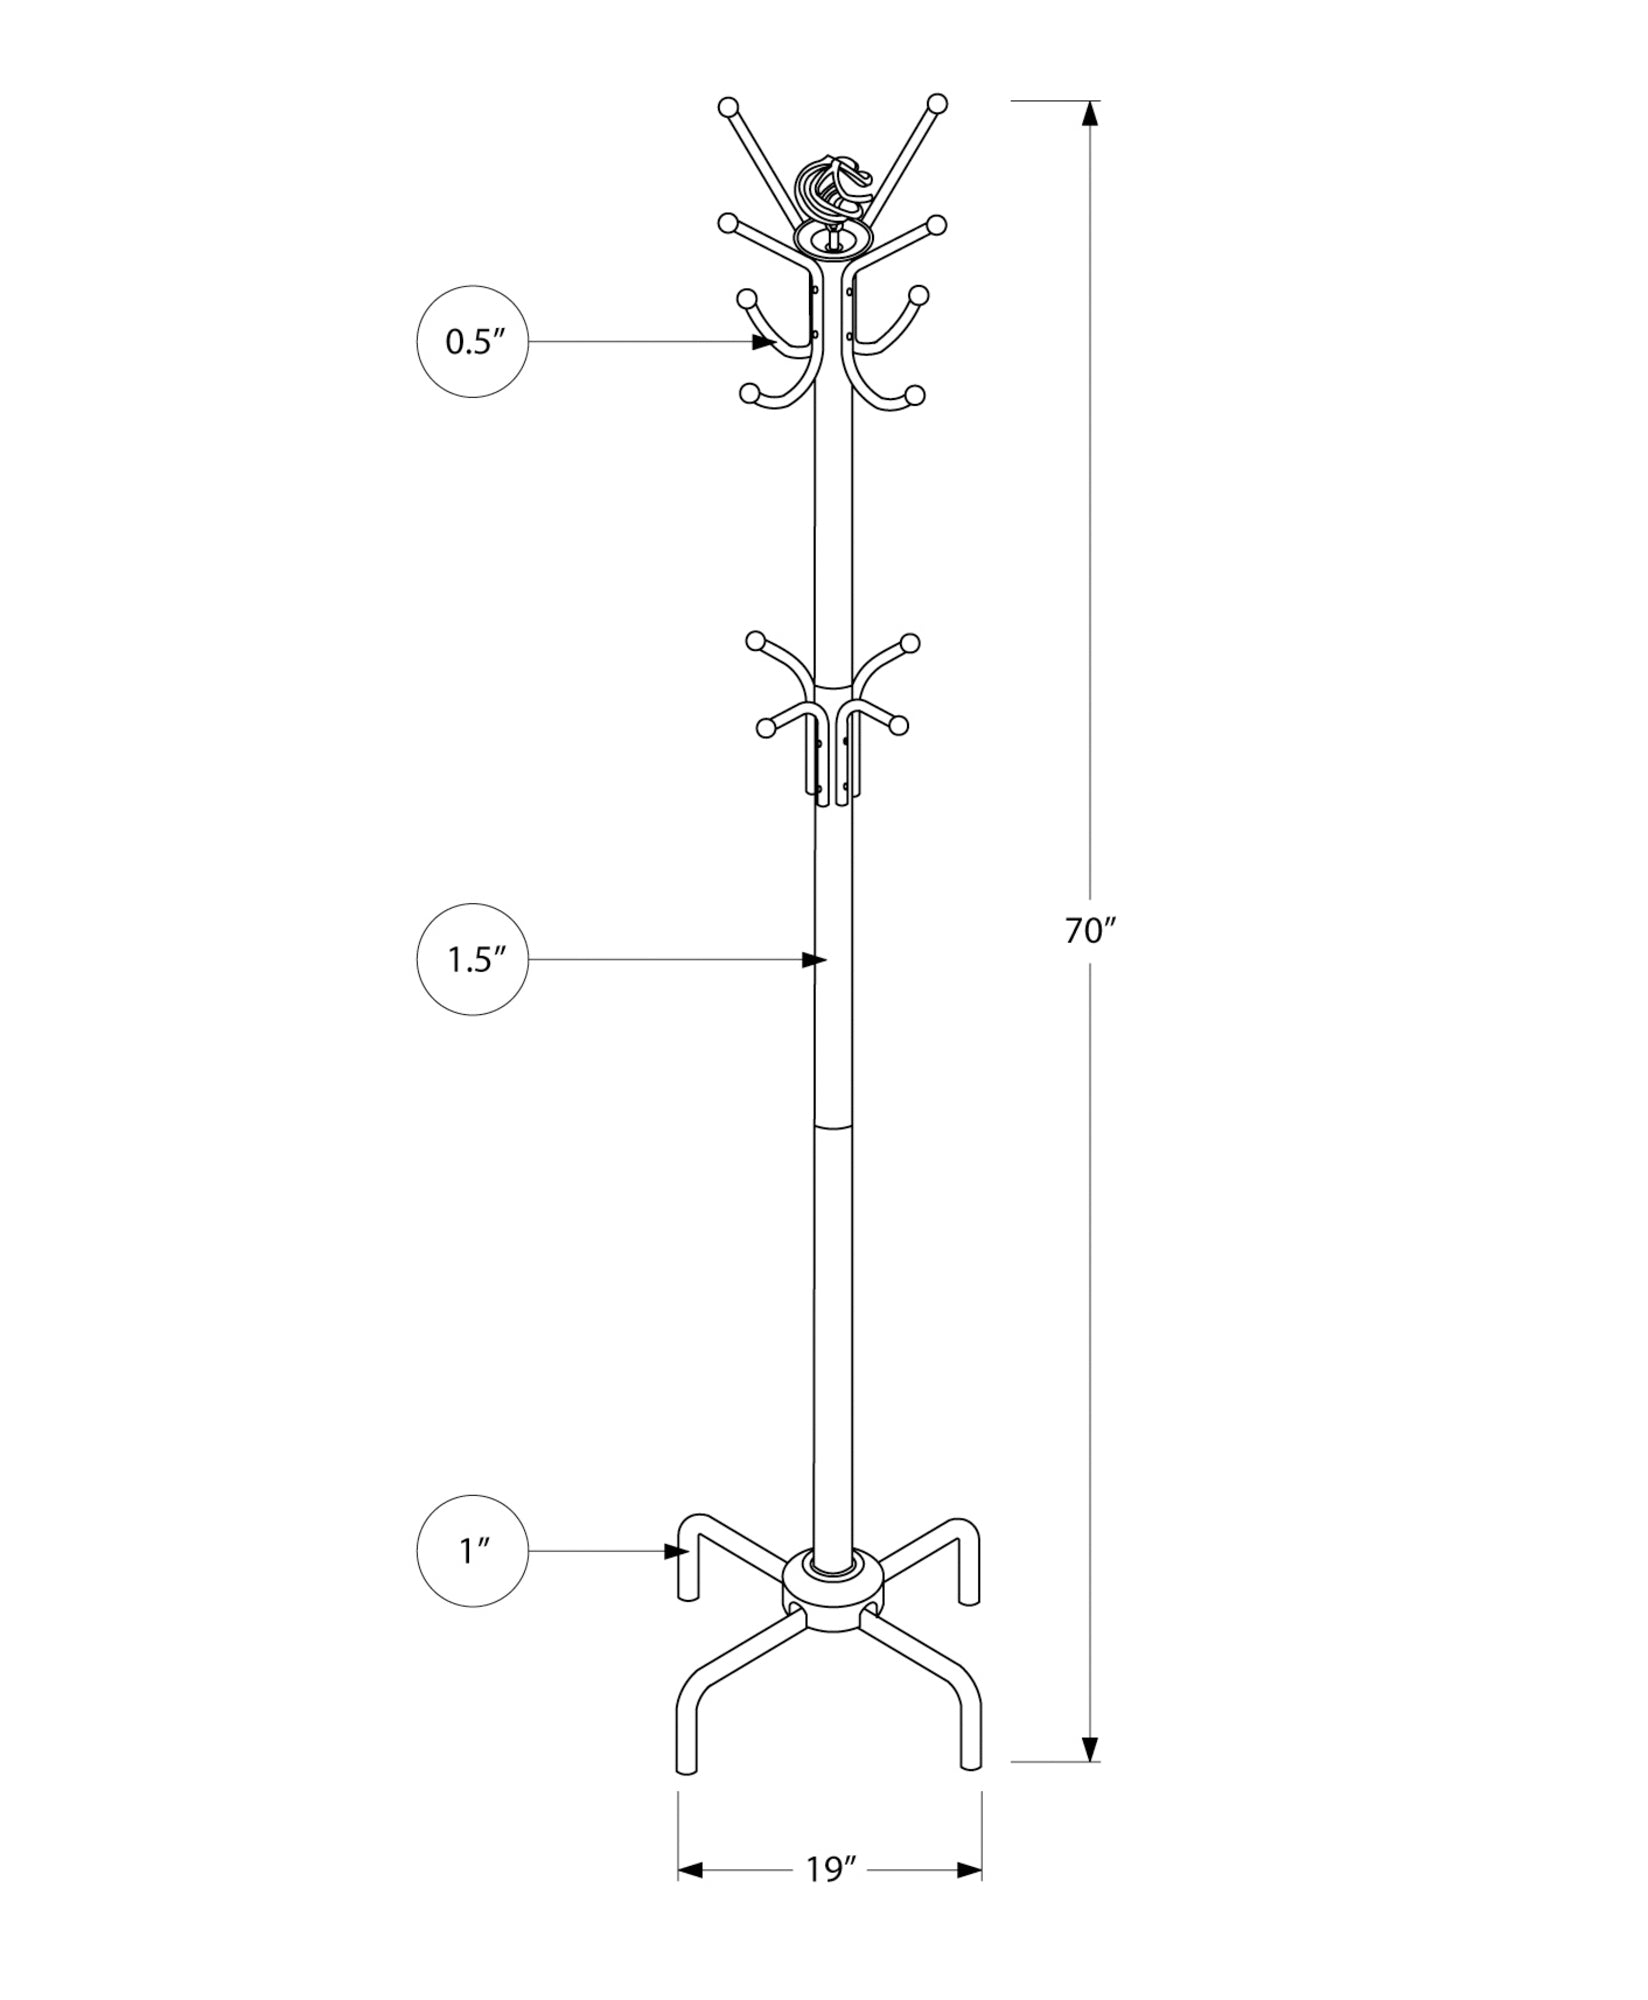 MN-492006    Coat Rack, Hall Tree, Free Standing, 12 Hooks, Entryway, 70"H, Metal, White, Contemporary, Modern